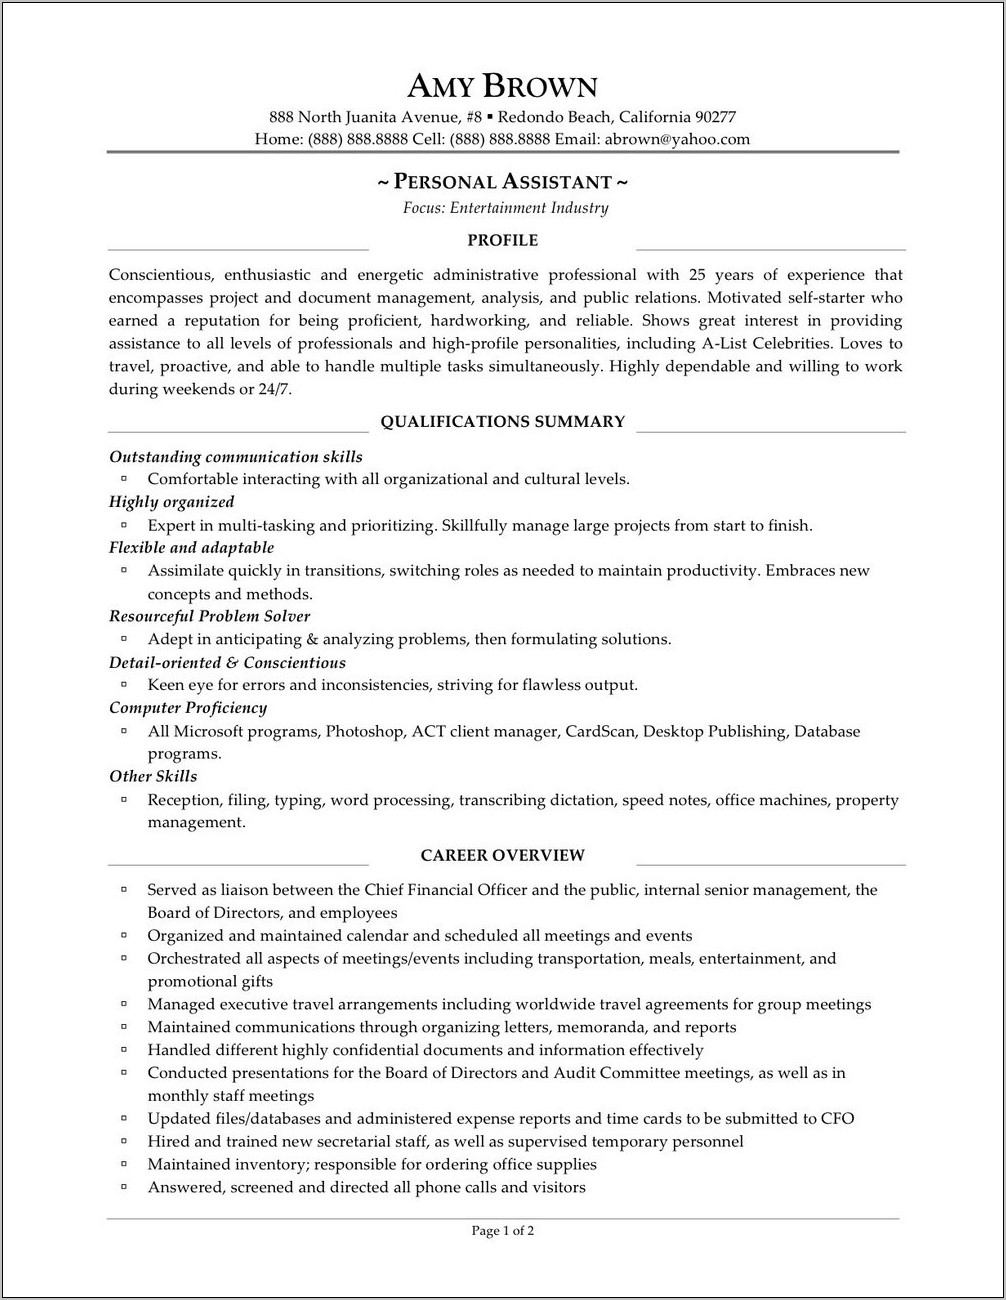 Resume Templates For Healthcare Assistant